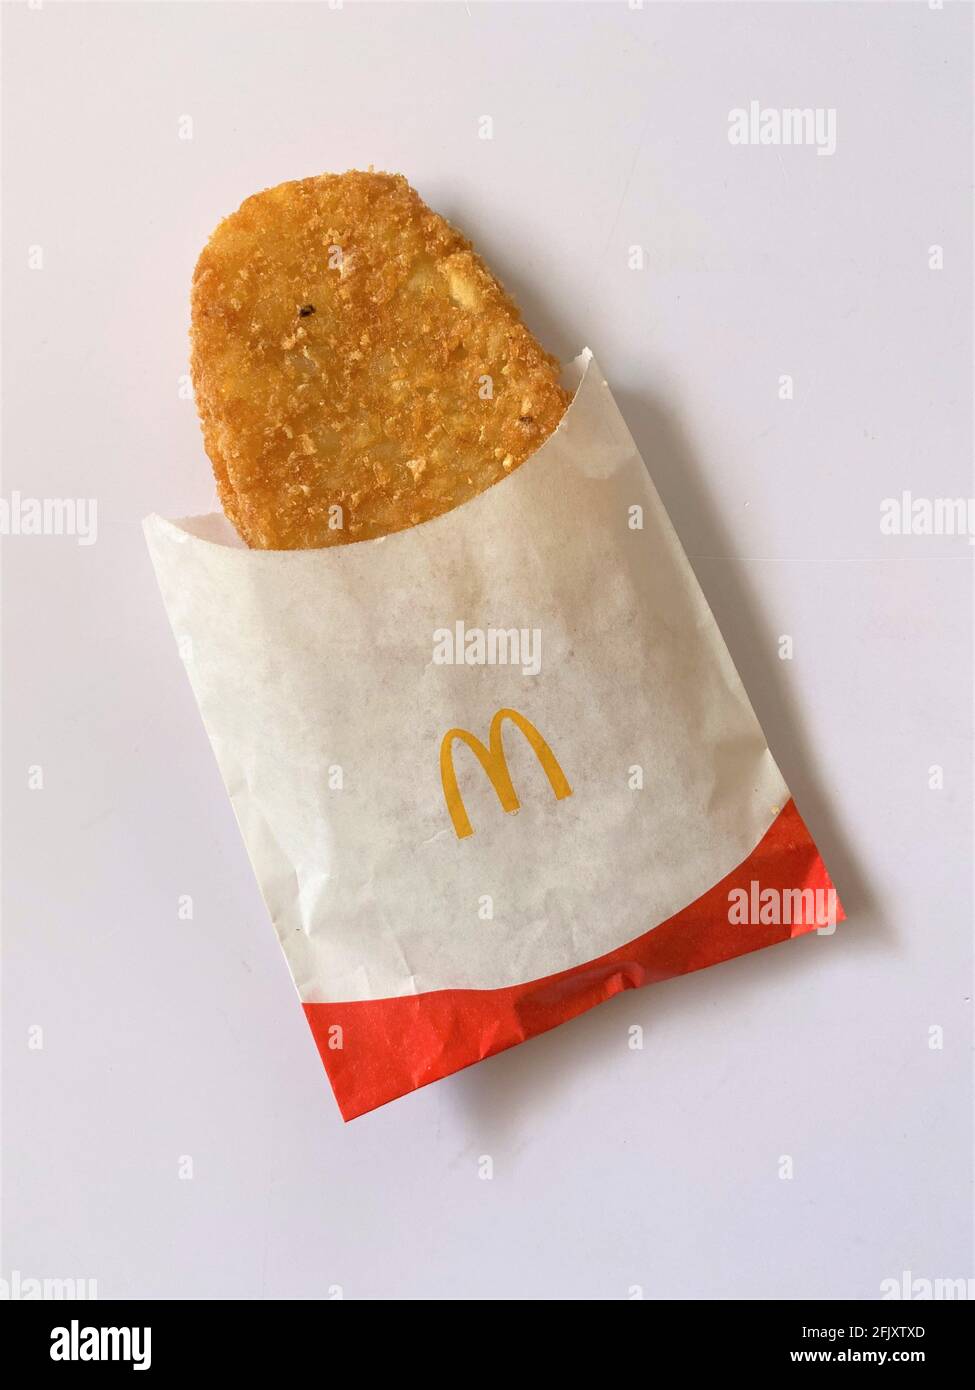 Warm freshly fried hash brown for breakfast from McDonalds fast food restaurant. Stock Photo